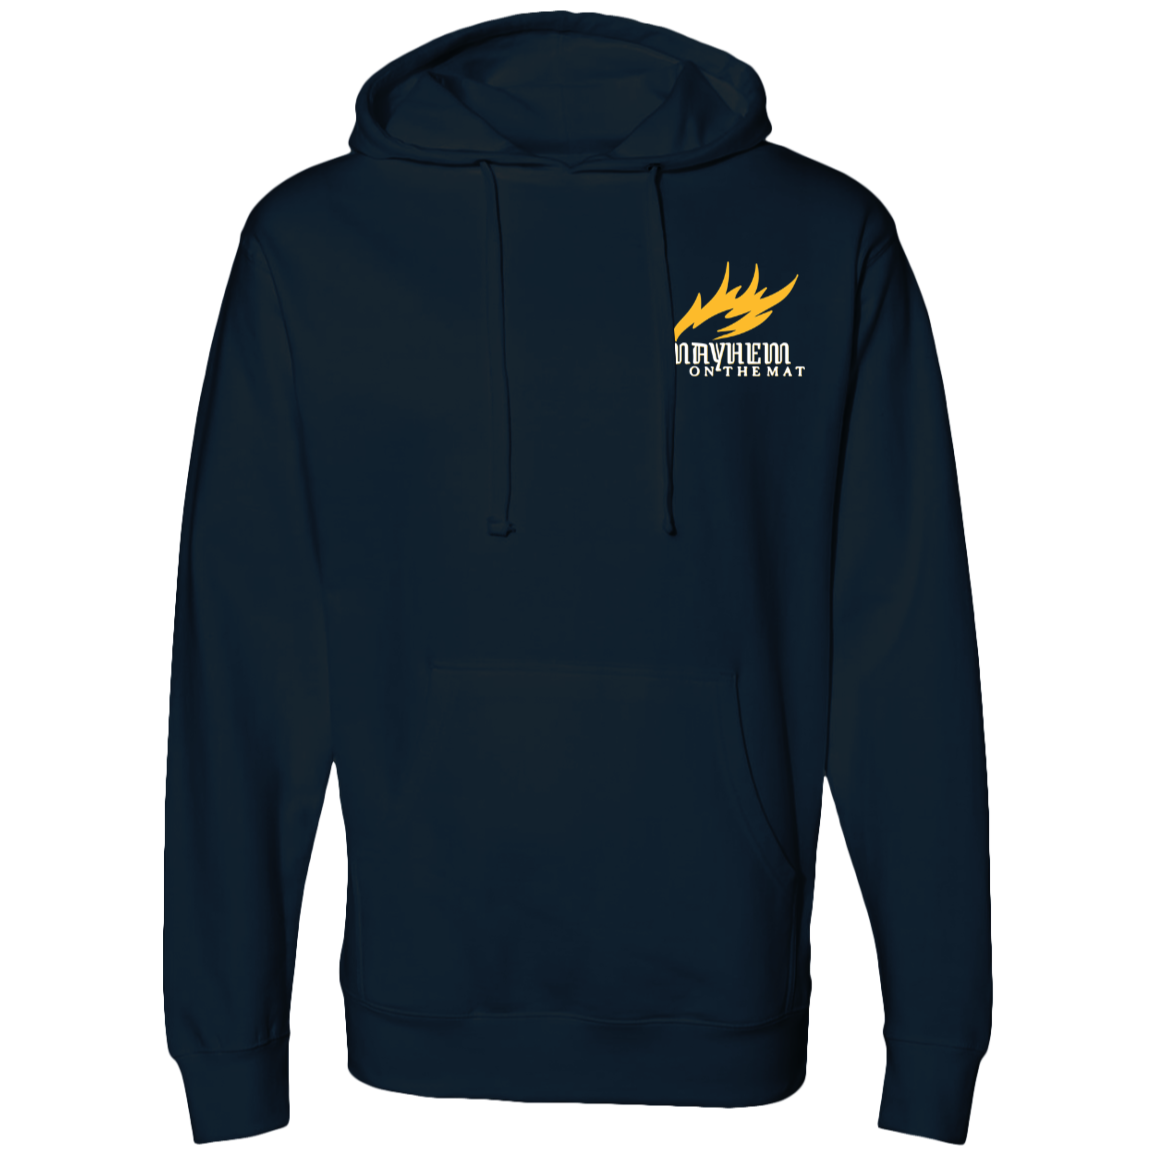 An intense Mayhem Makers - Navy hoodie with a passion-evoking yellow flame on it.